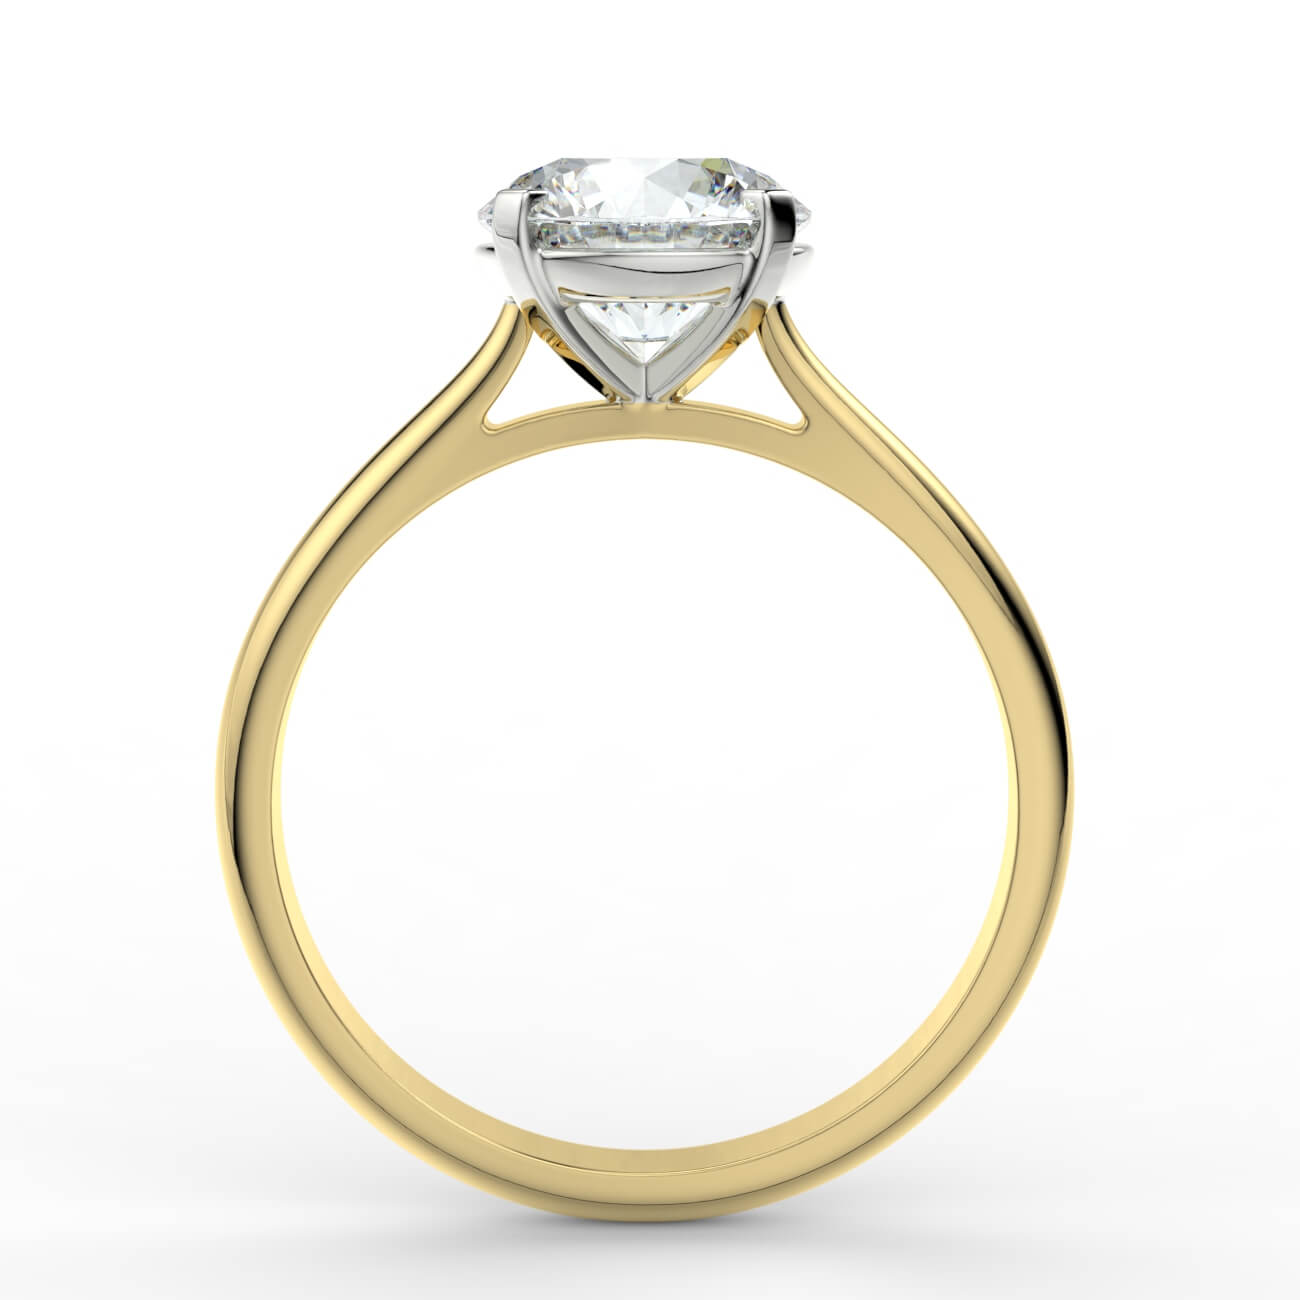 Round brilliant cut diamond cathedral engagement ring in yellow and white gold – Australian Diamond Network